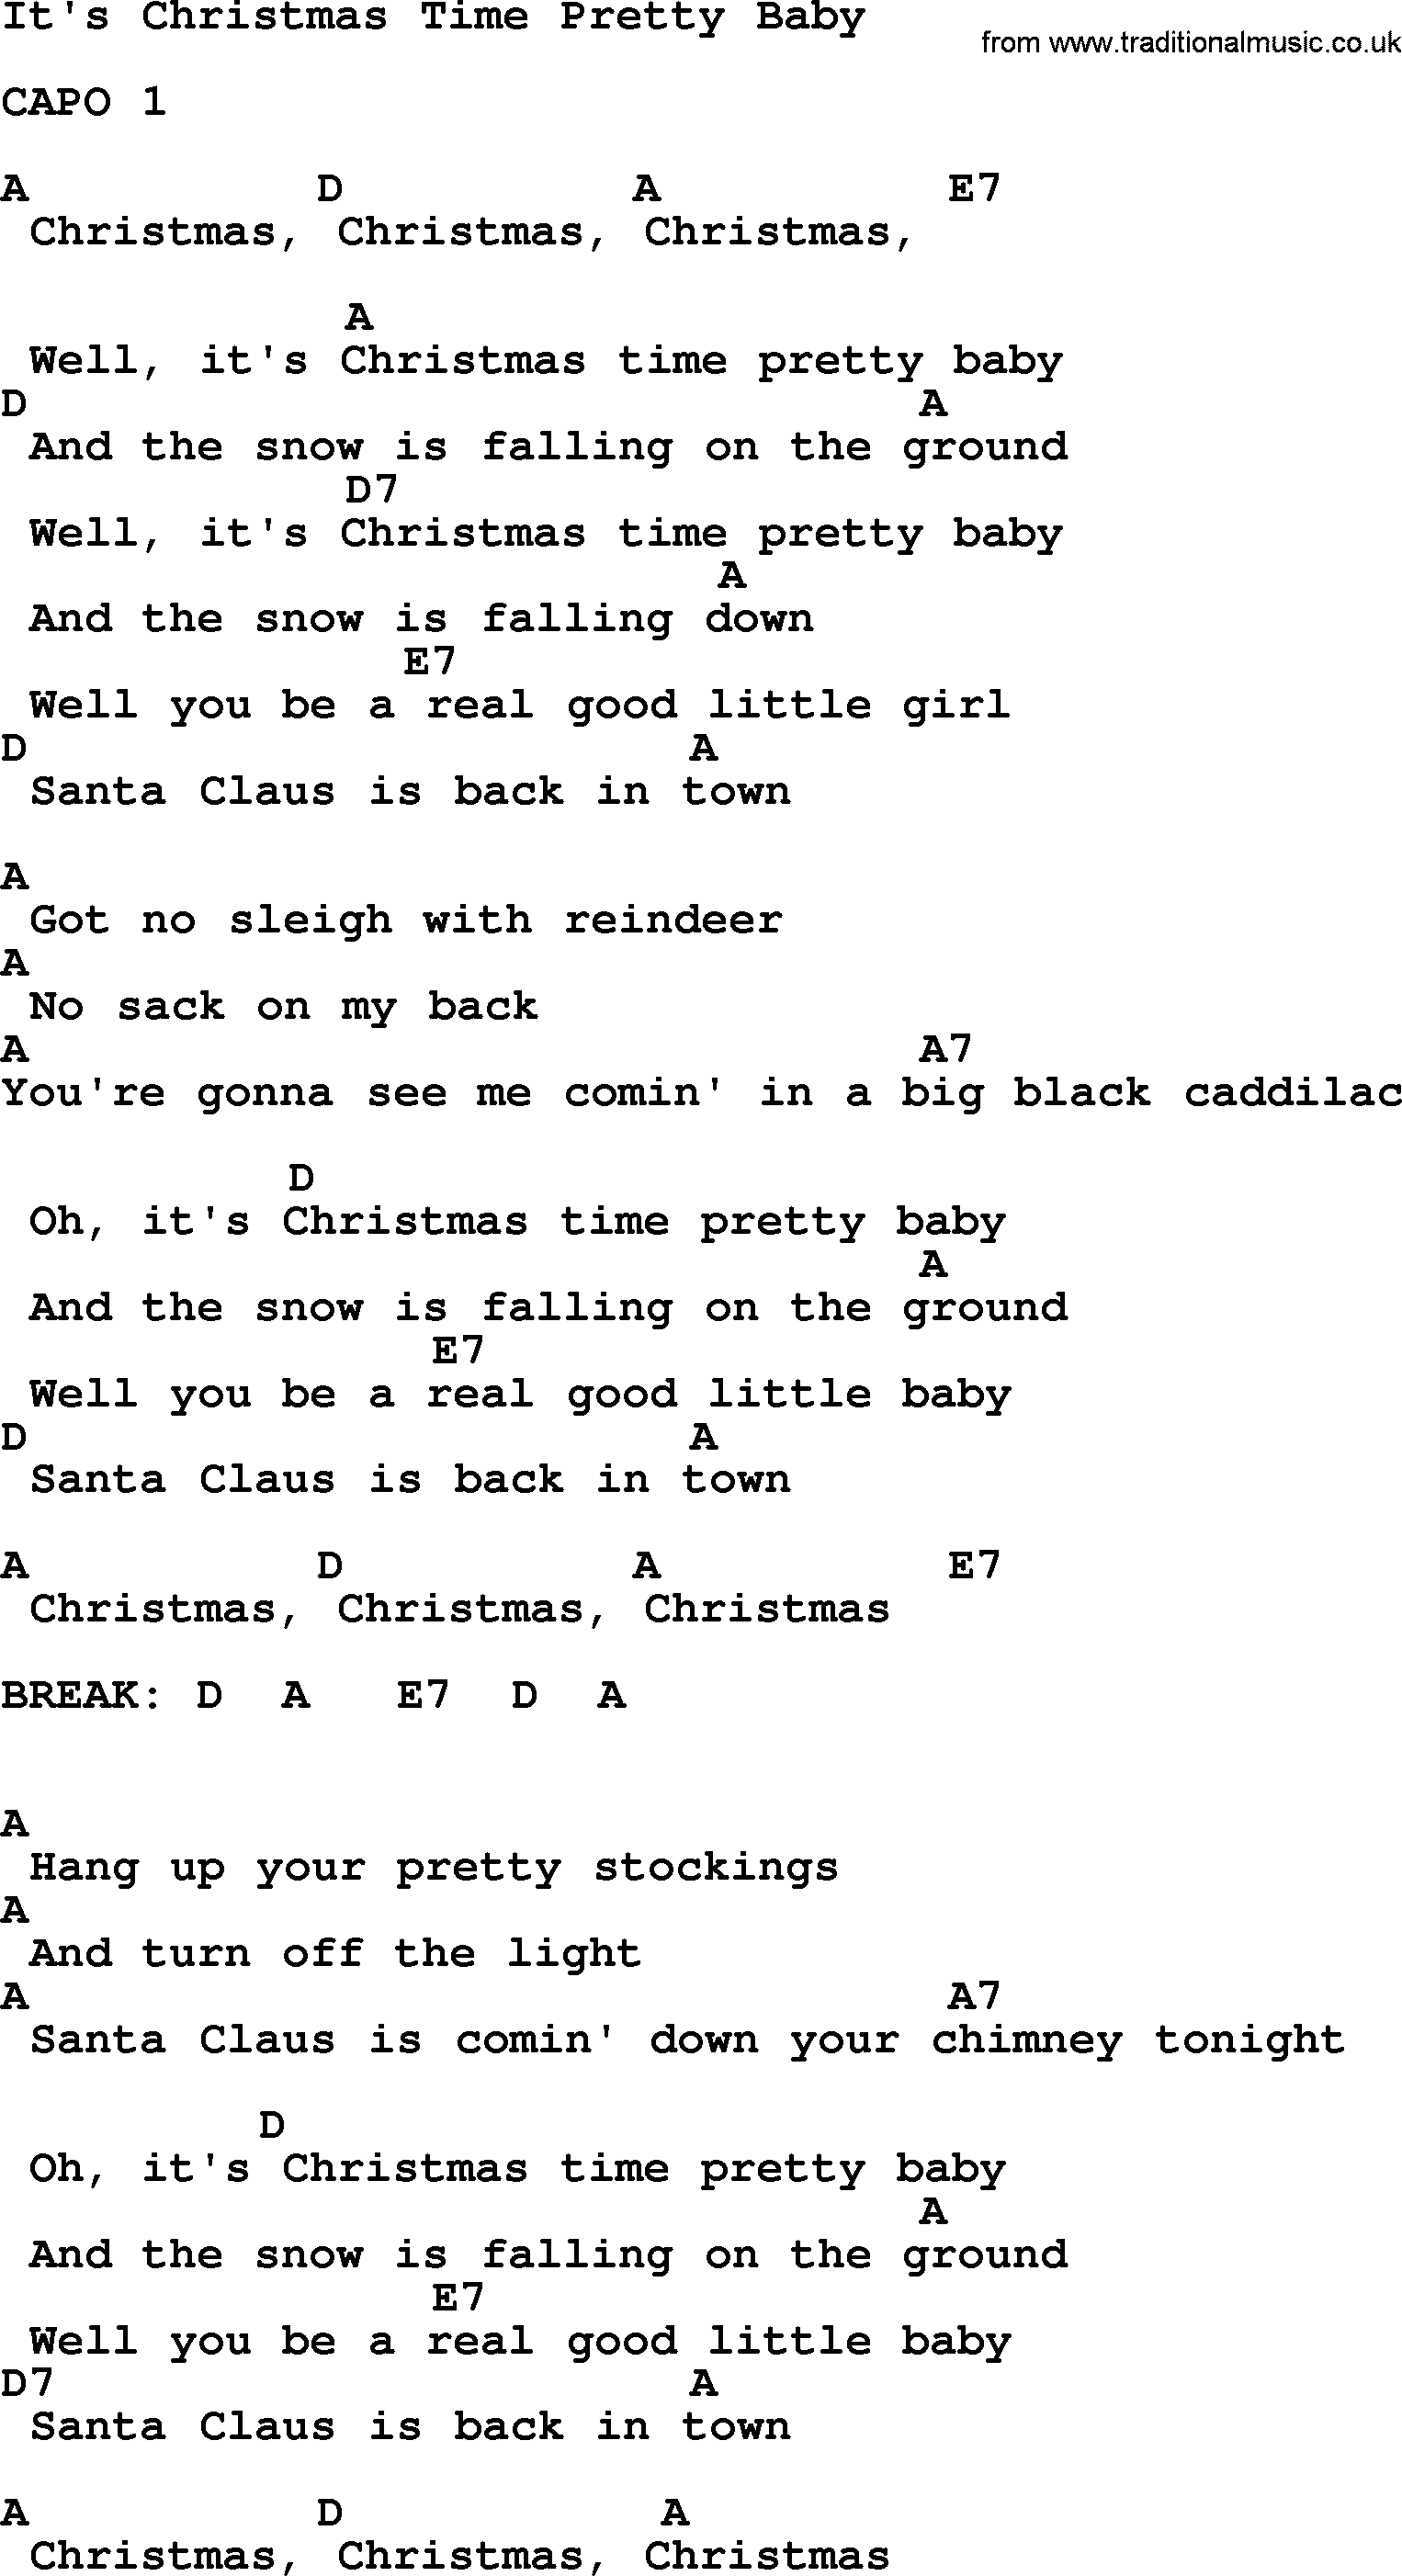 Elvis Presley song: It's Christmas Time Pretty Baby, lyrics and chords